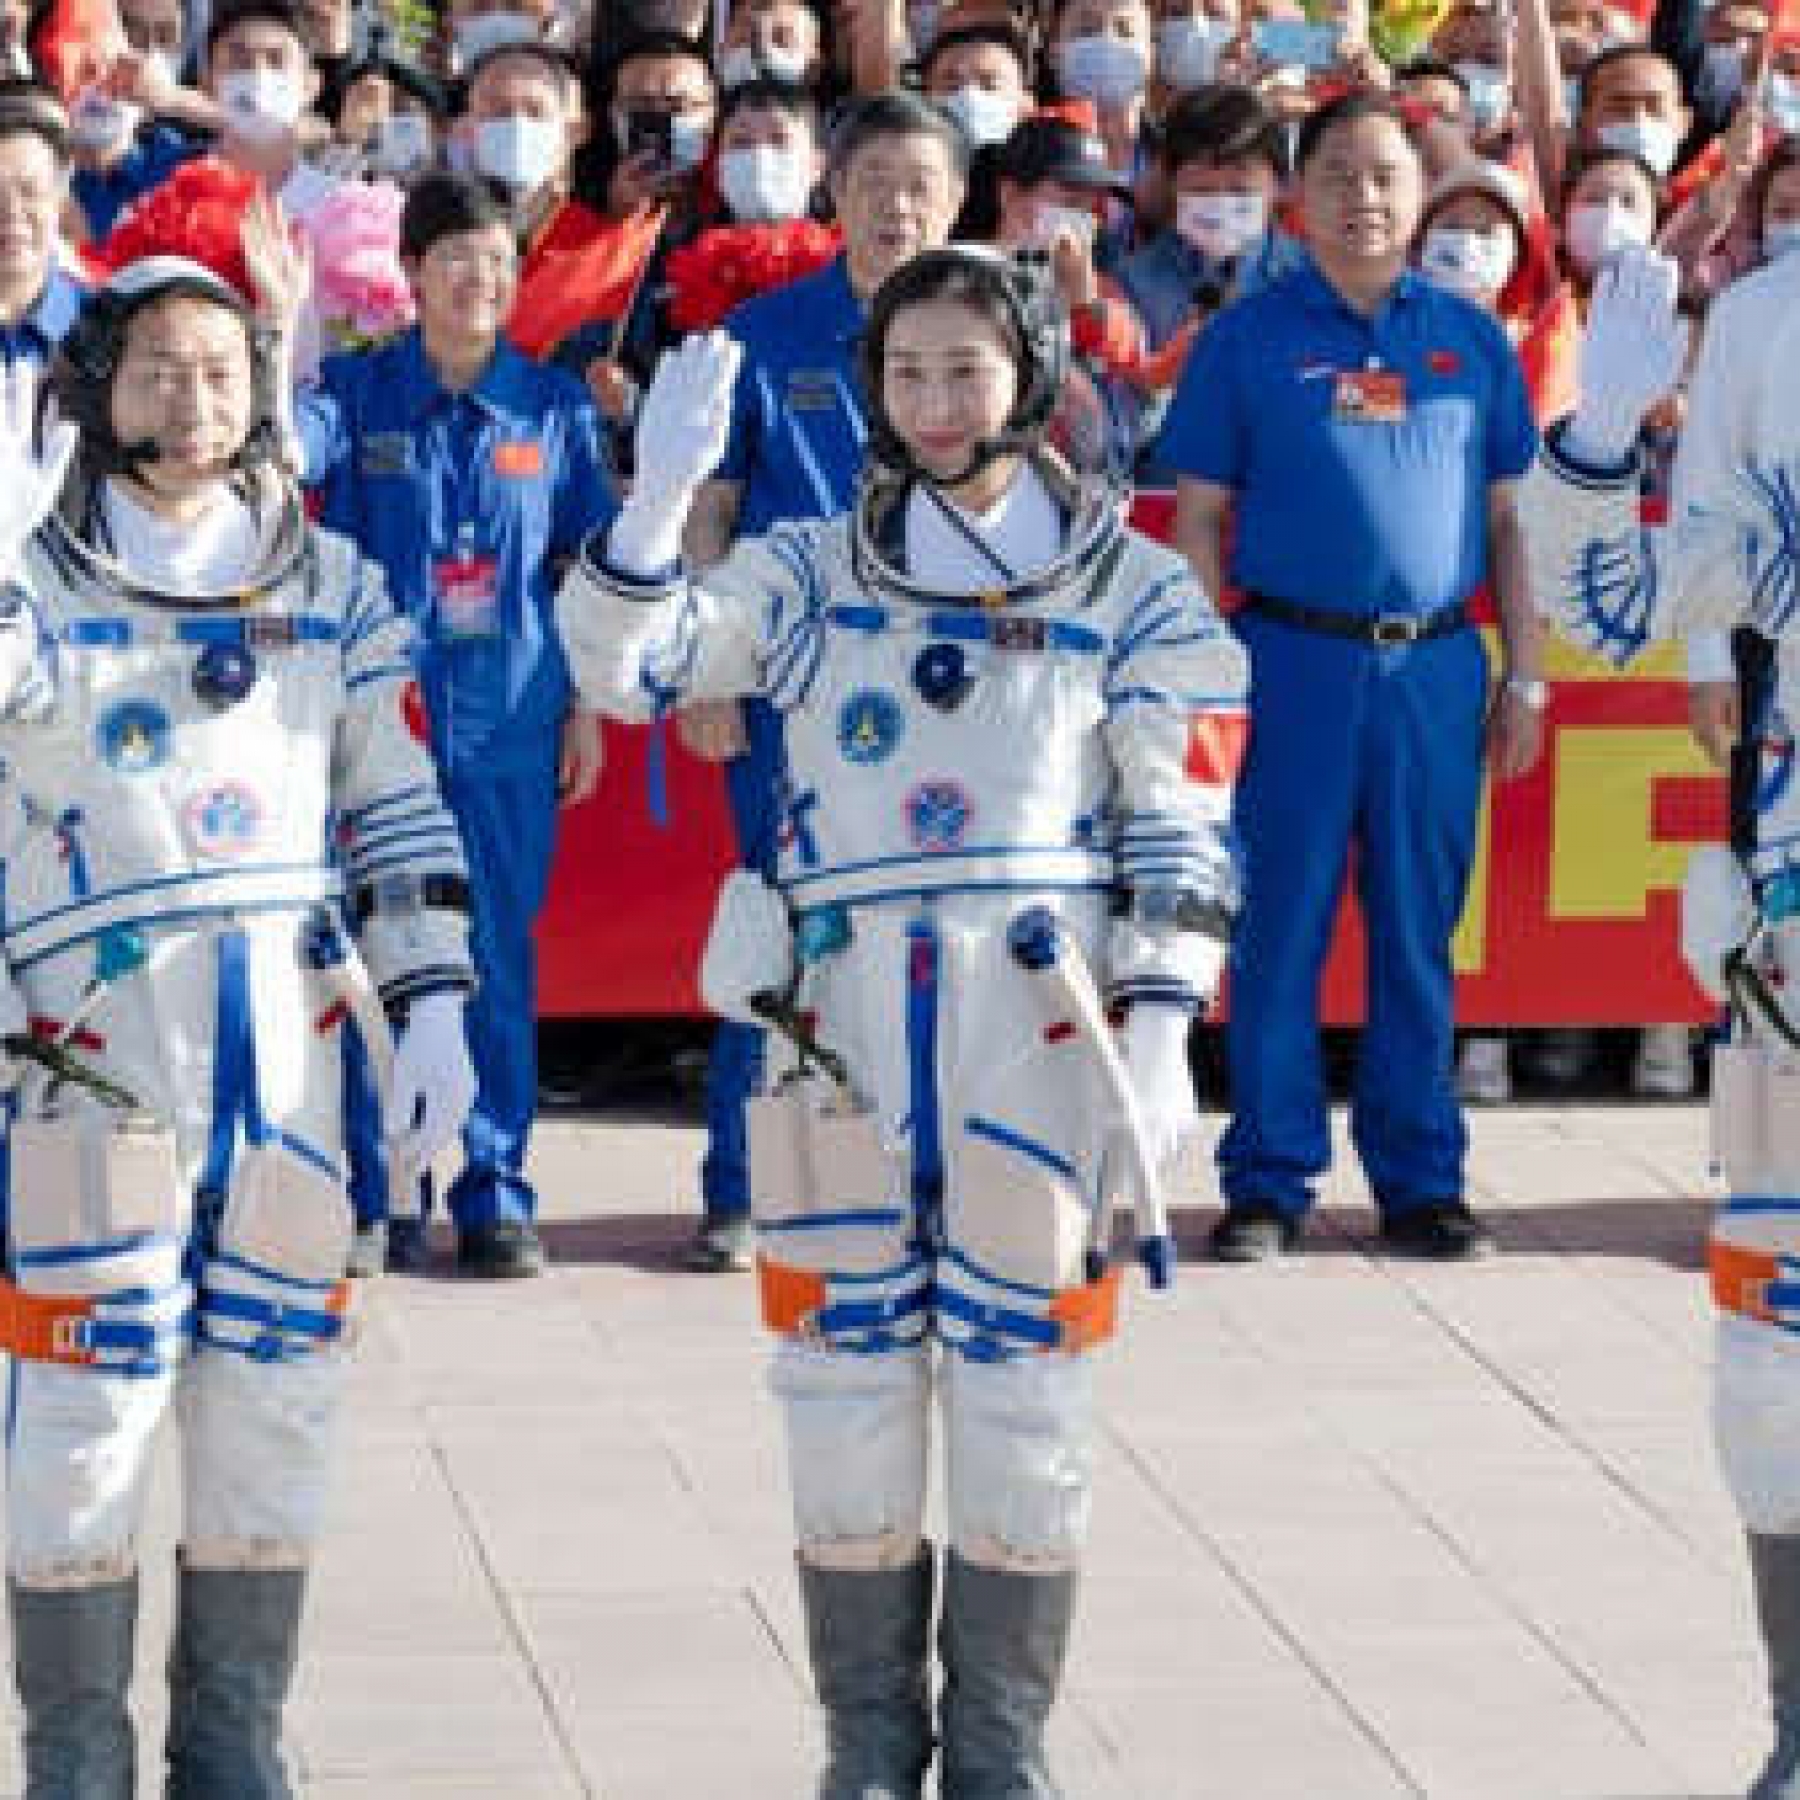 The mission carried out by three astronauts at the Tiangong space station was a "complete success"